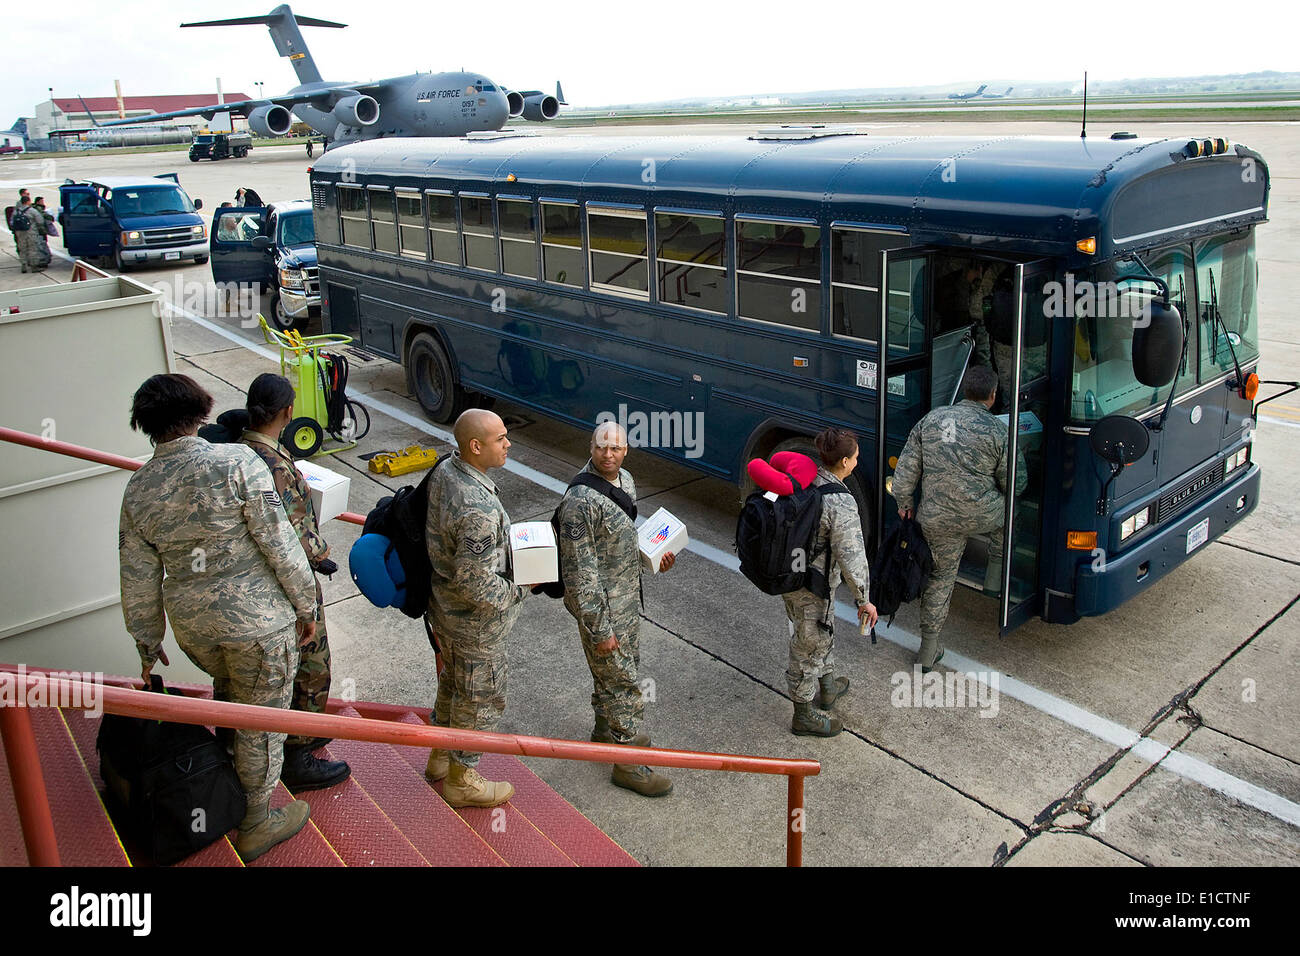 A U.S. Air Force Expeditionary Medical Support team comprised of more than 80 Airmen from 13 different bases boards passenger b Stock Photo